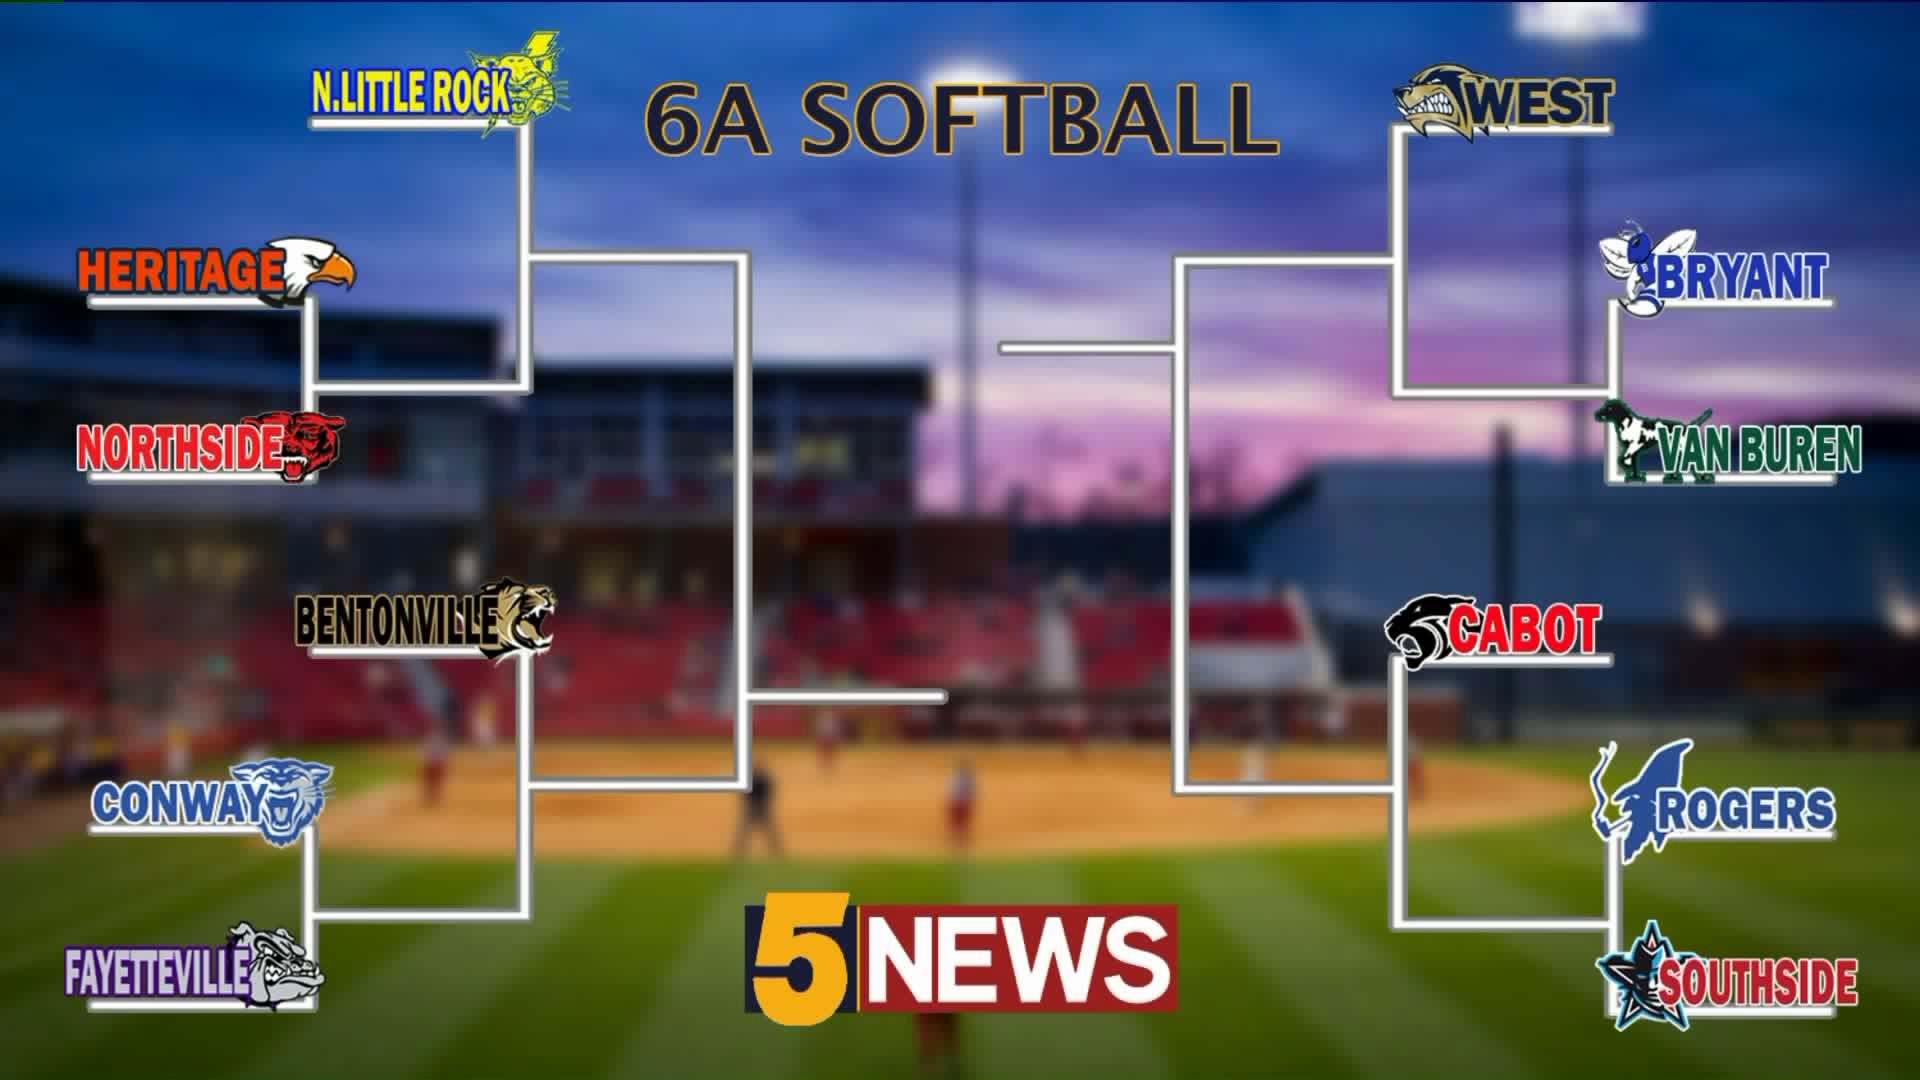 Bentonville squads among favorites for softball title